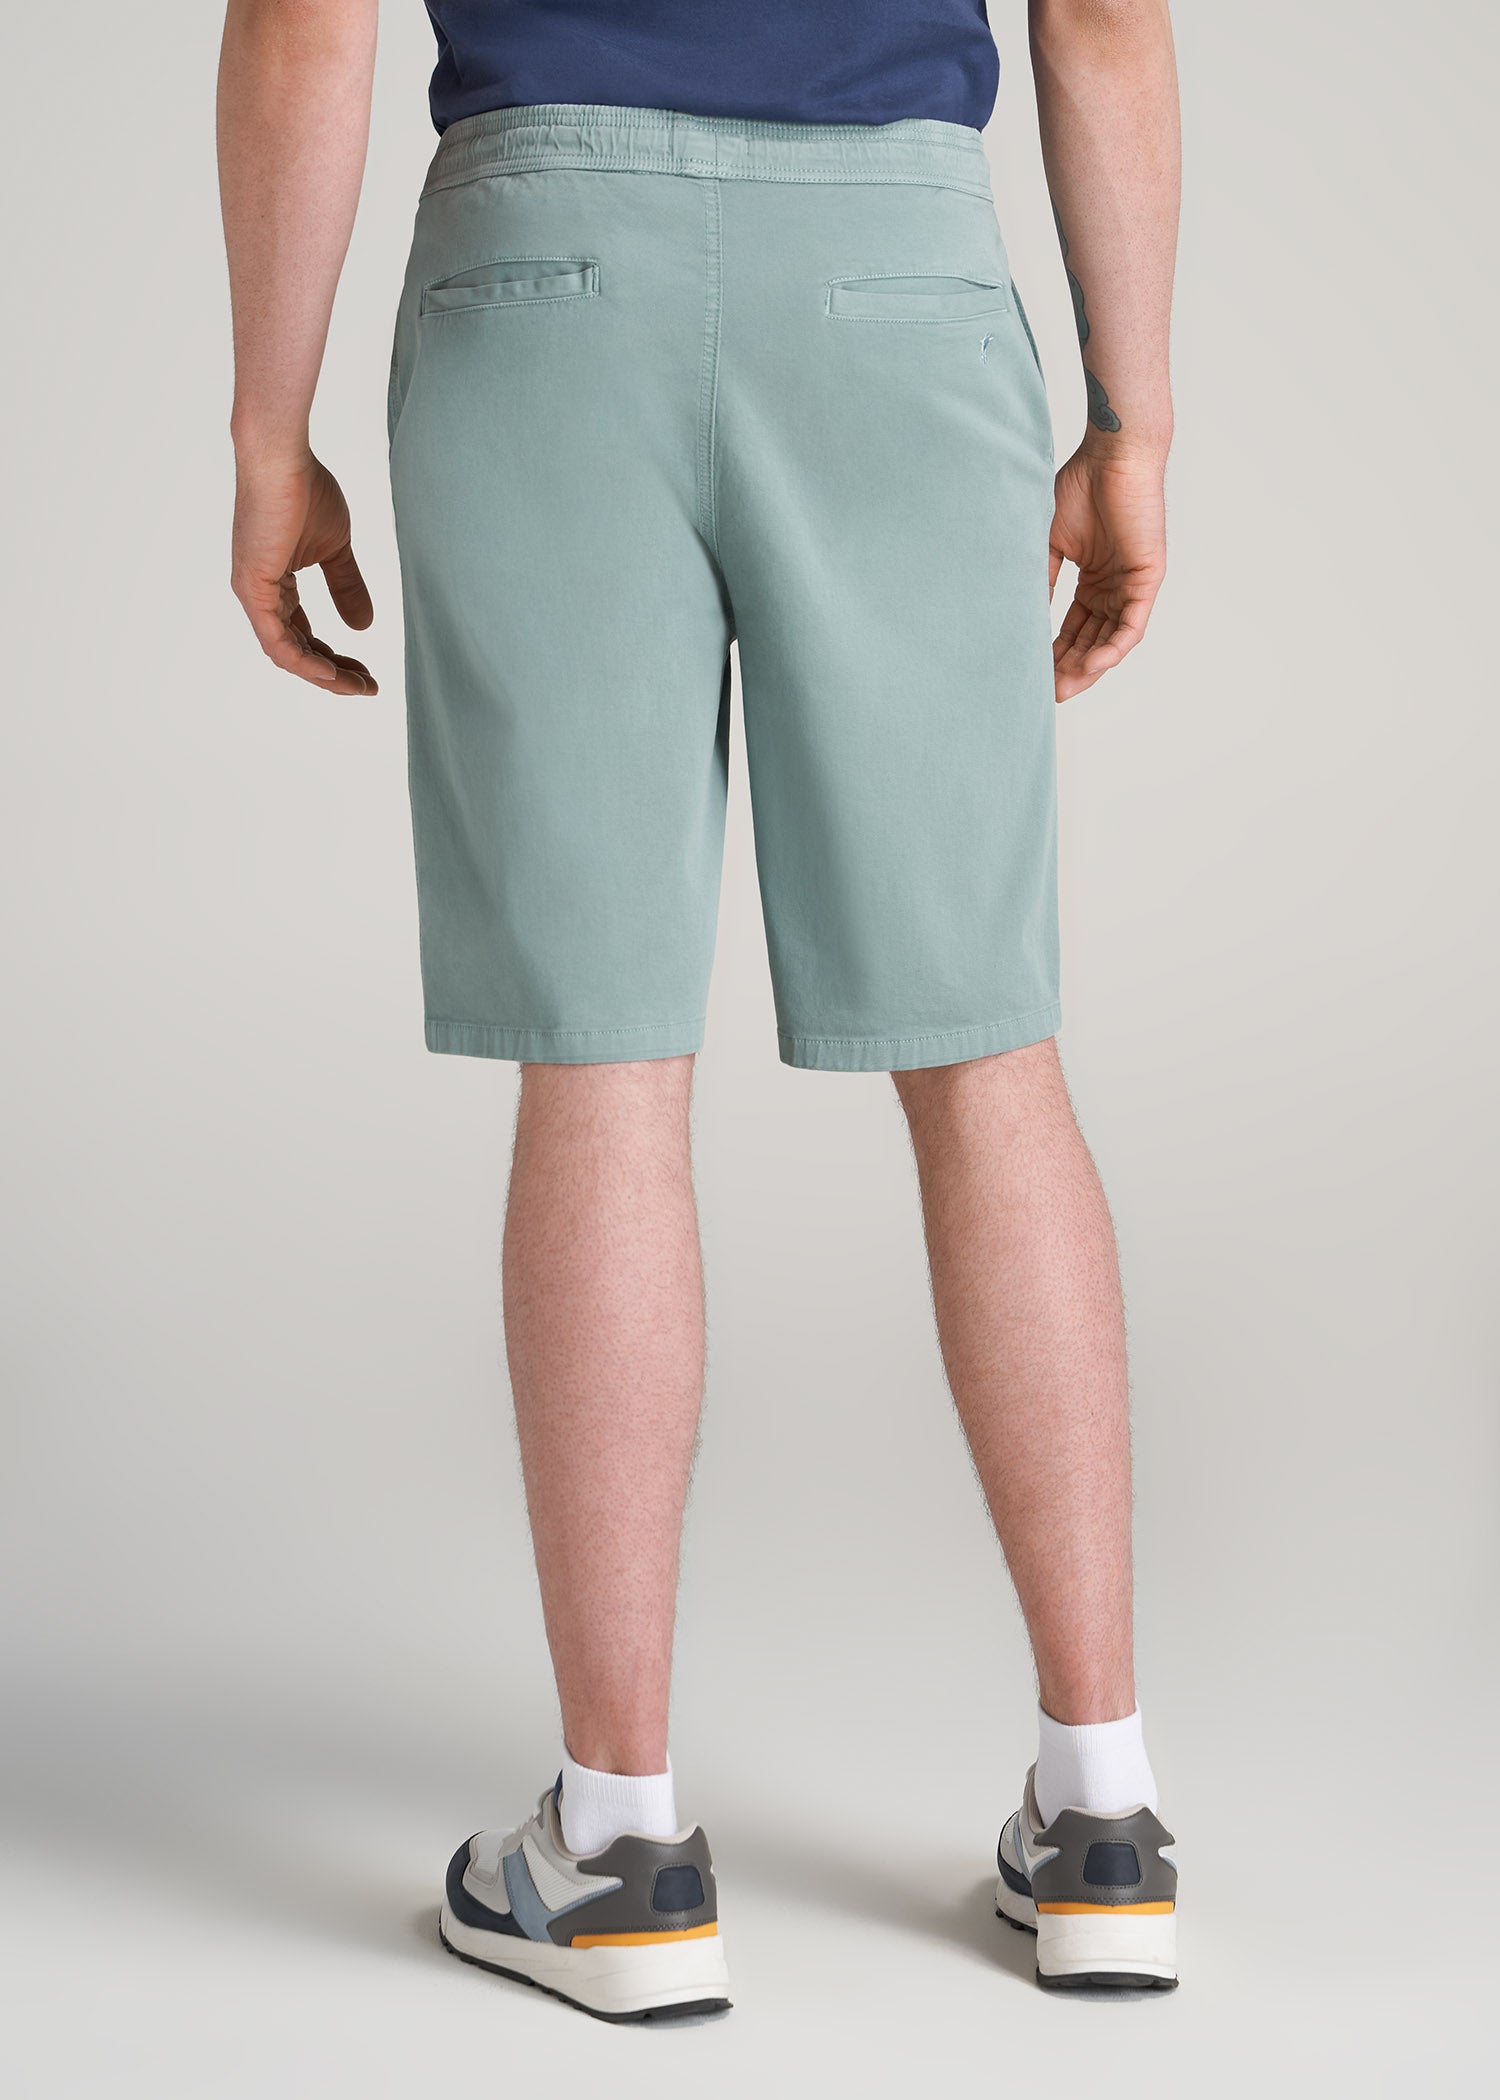 Stretch Twill Pull-On Shorts for Tall Men in Eucalyptus